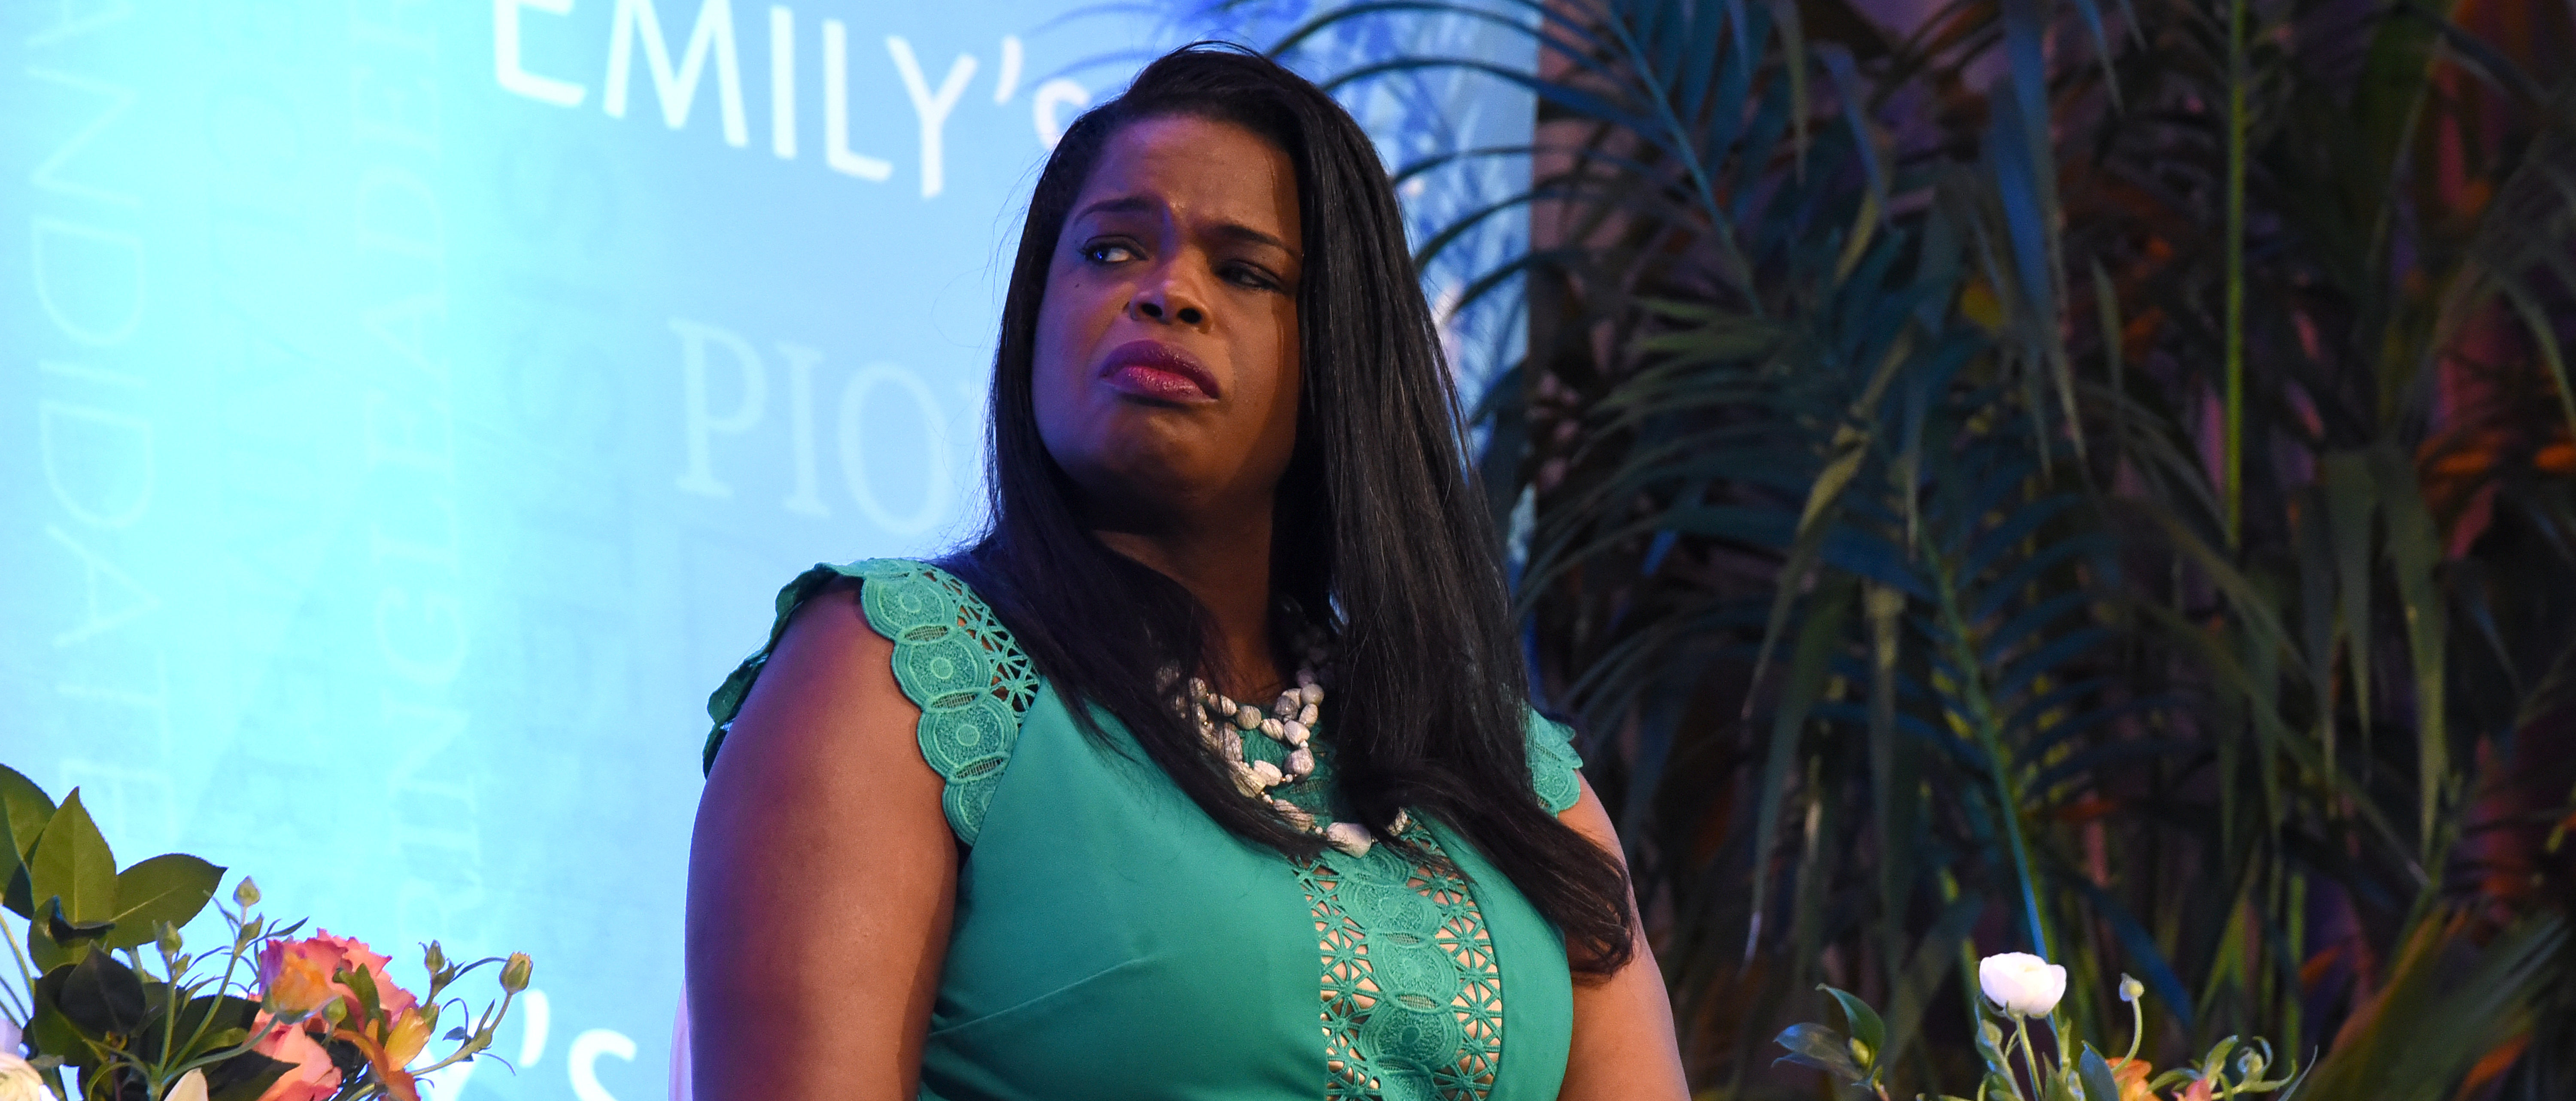 LOS ANGELES, CALIFORNIA - FEBRUARY 19: Kim Foxx speaks onstage during Raising Our Voices: Supporting More Women in Hollywood & Politics at Four Seasons Hotel Los Angeles in Beverly Hills on February 19, 2019 in Los Angeles, California. (Photo by Presley Ann/Getty Images for EMILY'S List)